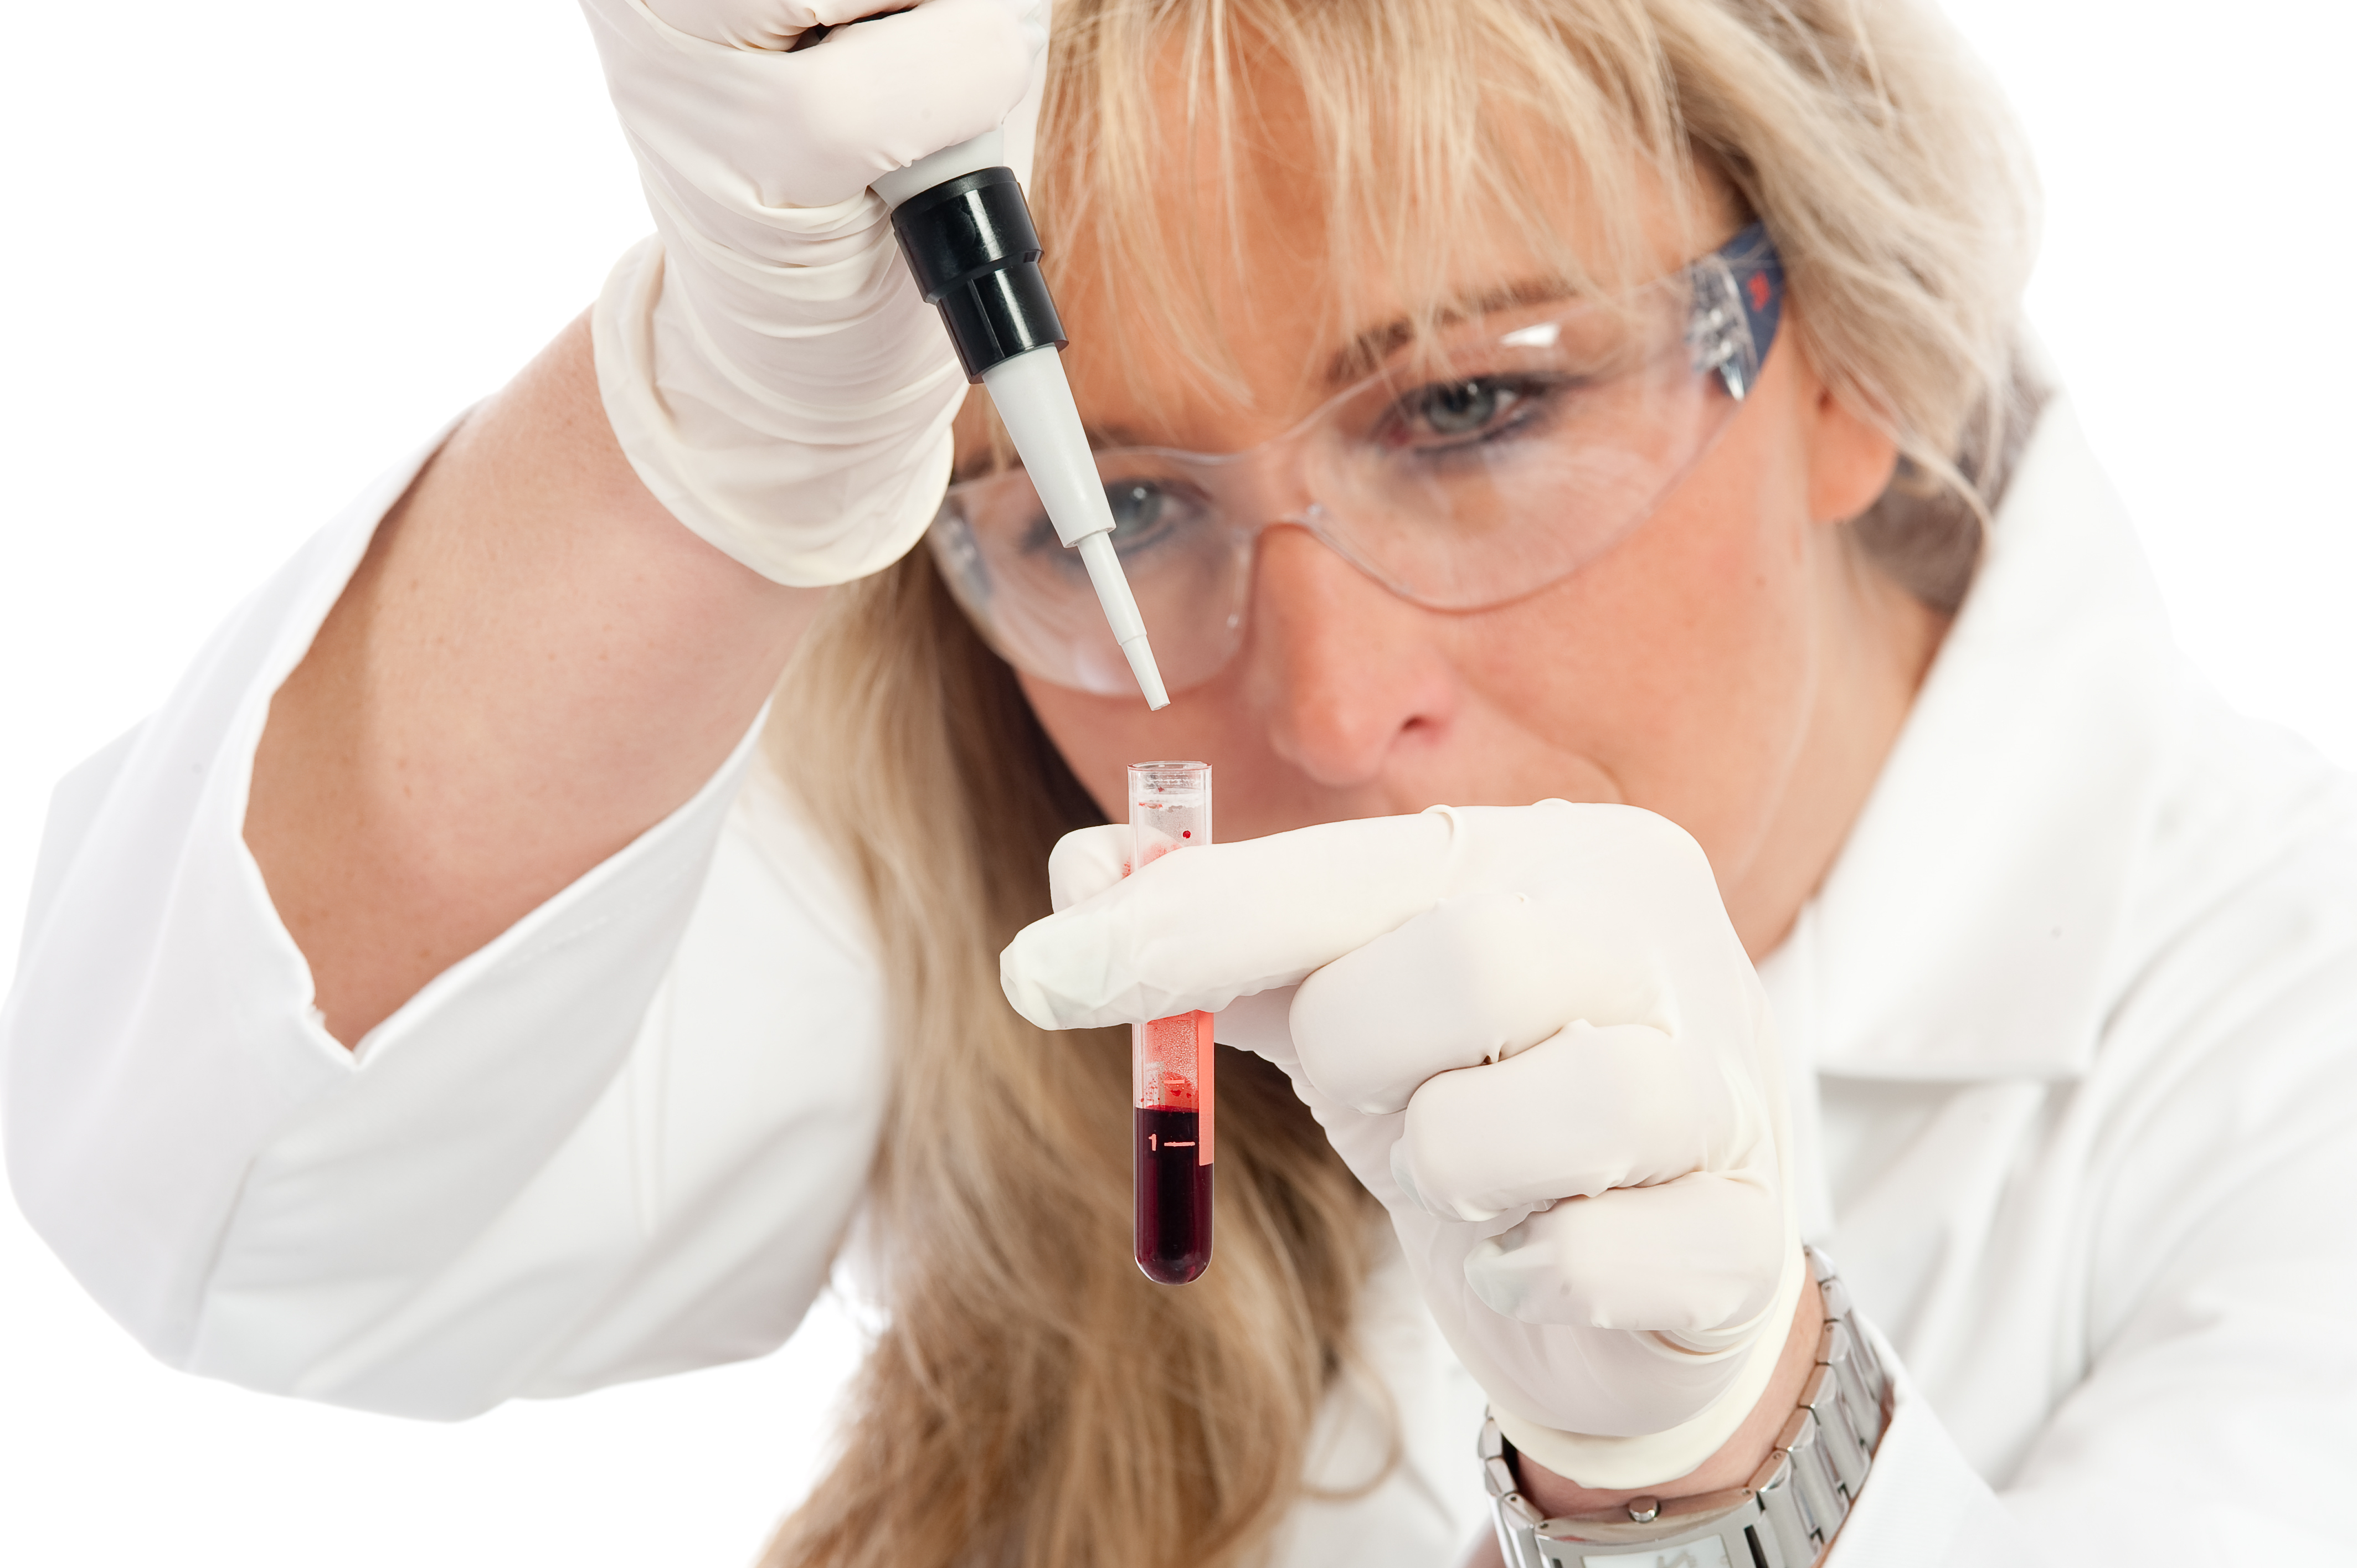 Scientist looking closely at a blood sample in a test tube